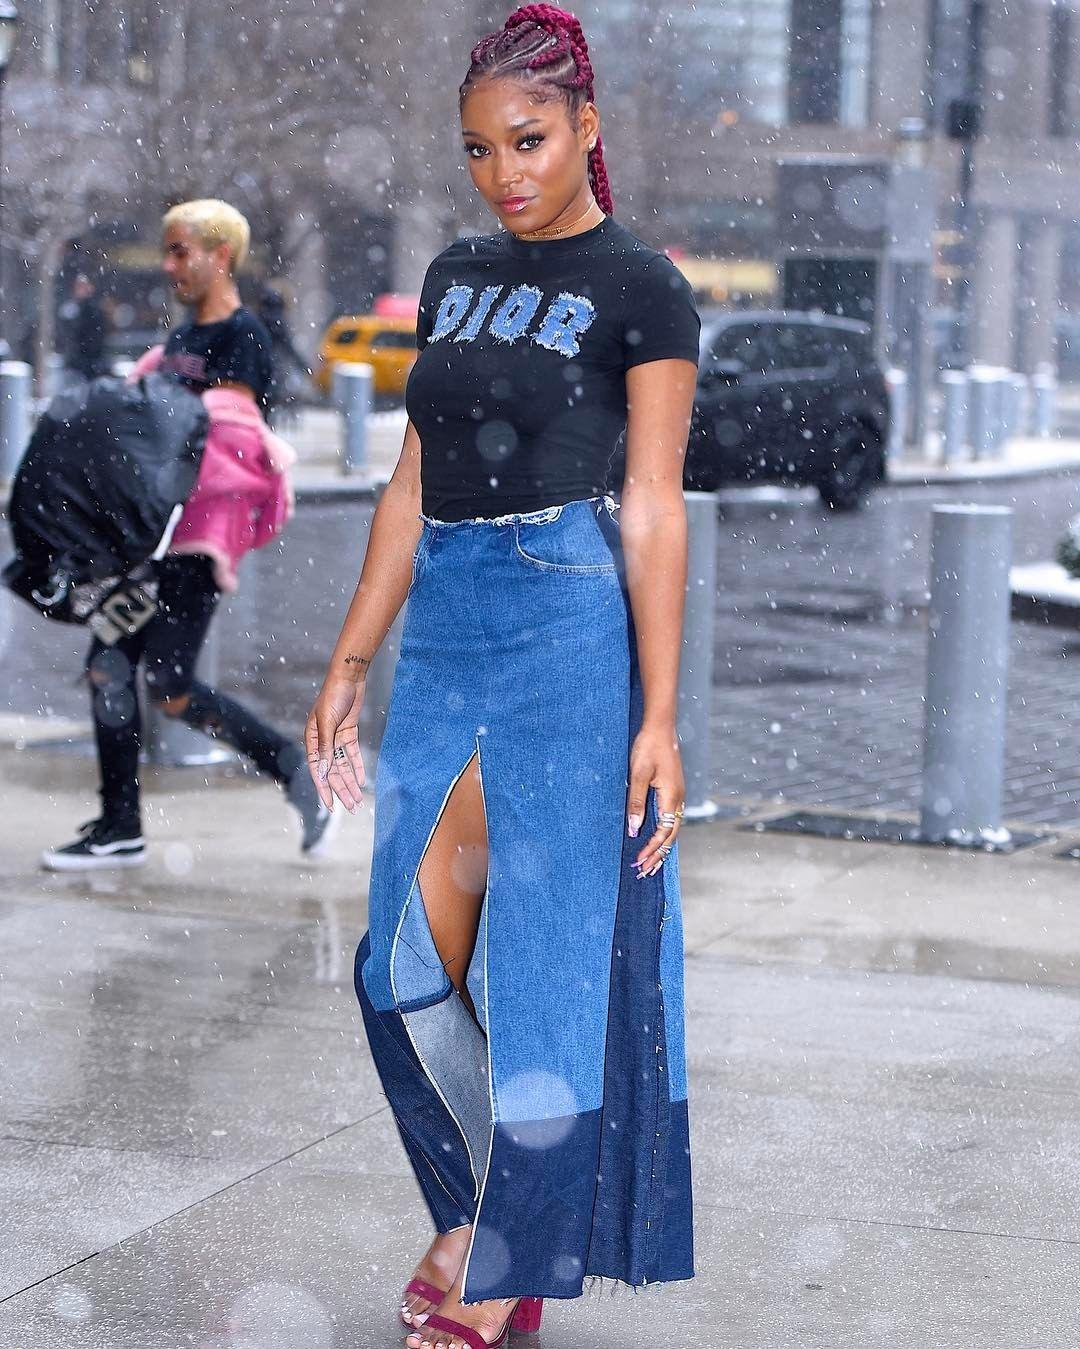 -T-shirt with iconic Dior logo from Galliano era 
-Denim trompe l'oeil on 100% cotton 
-Made in France 
-As seen on Keke Palmer

Approximate Measurements (in inches) 
-Total length: 20”
-Shoulder to shoulder: 14”
-Sleeve length: 7”
-Chest: